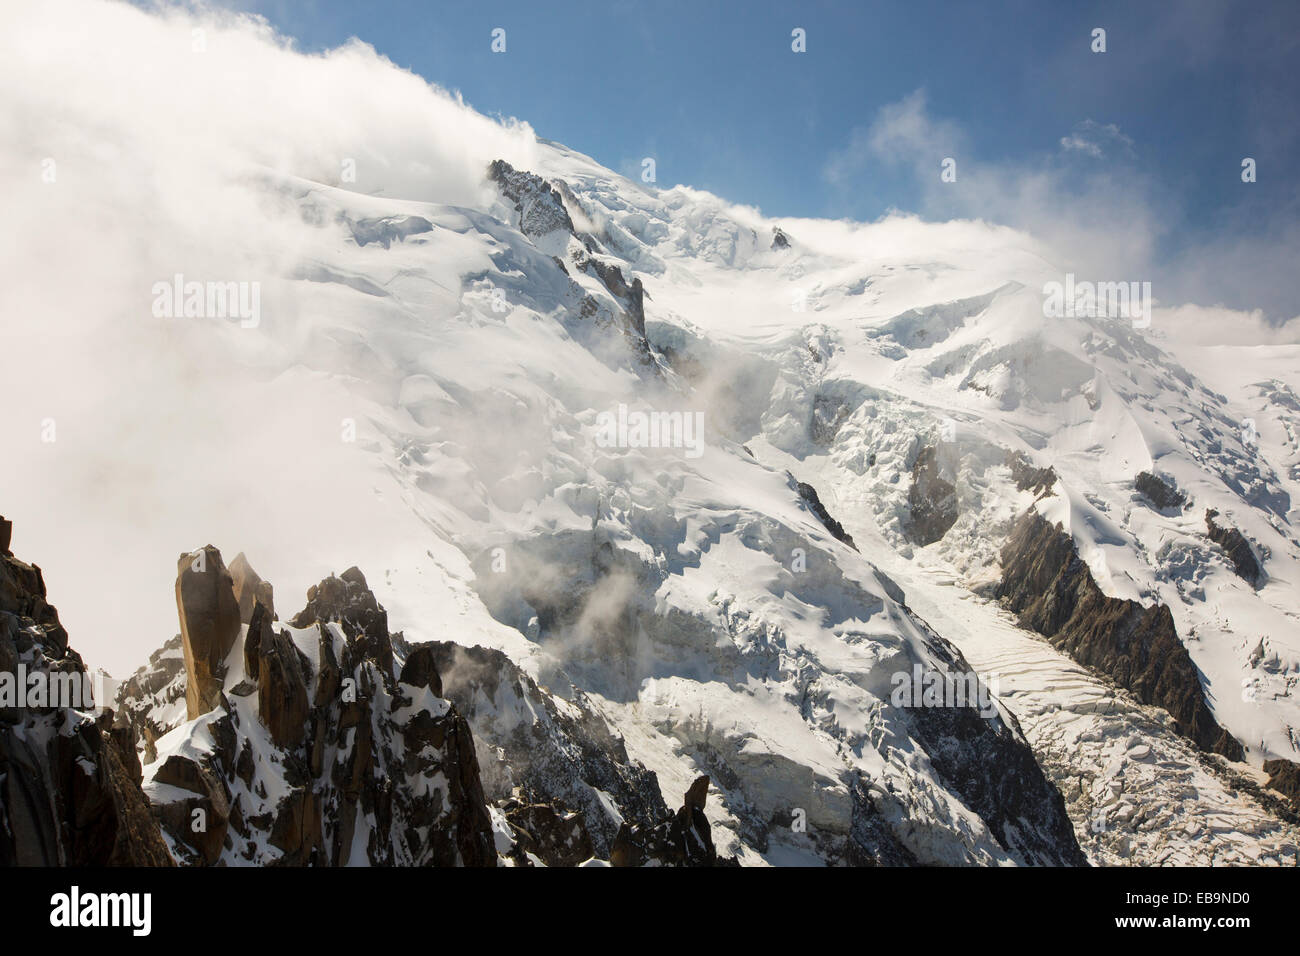 Mont Blanc from the Aiguille Du Midi above Chamonix, France. Stock Photo